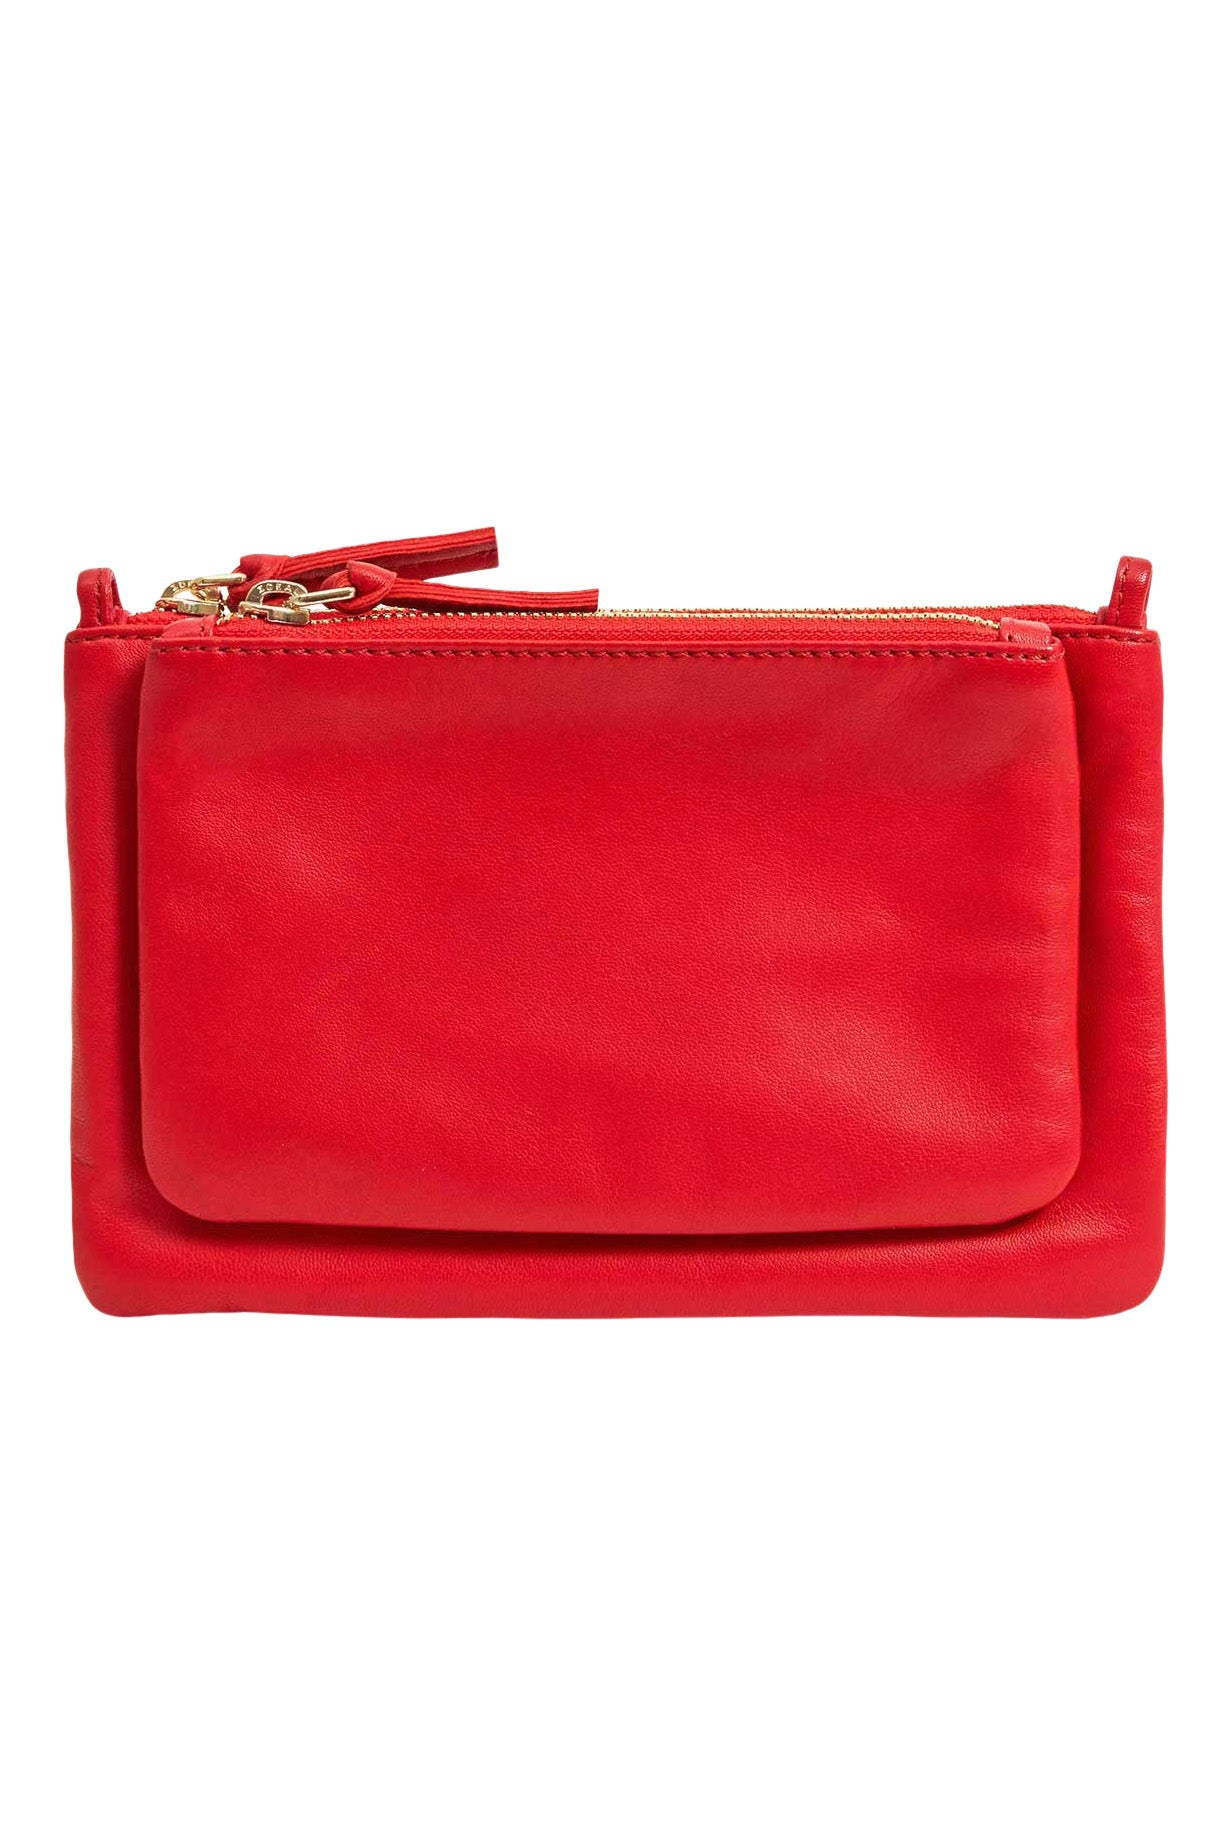 Clare V. Wallet Clutch Plus in Rouge